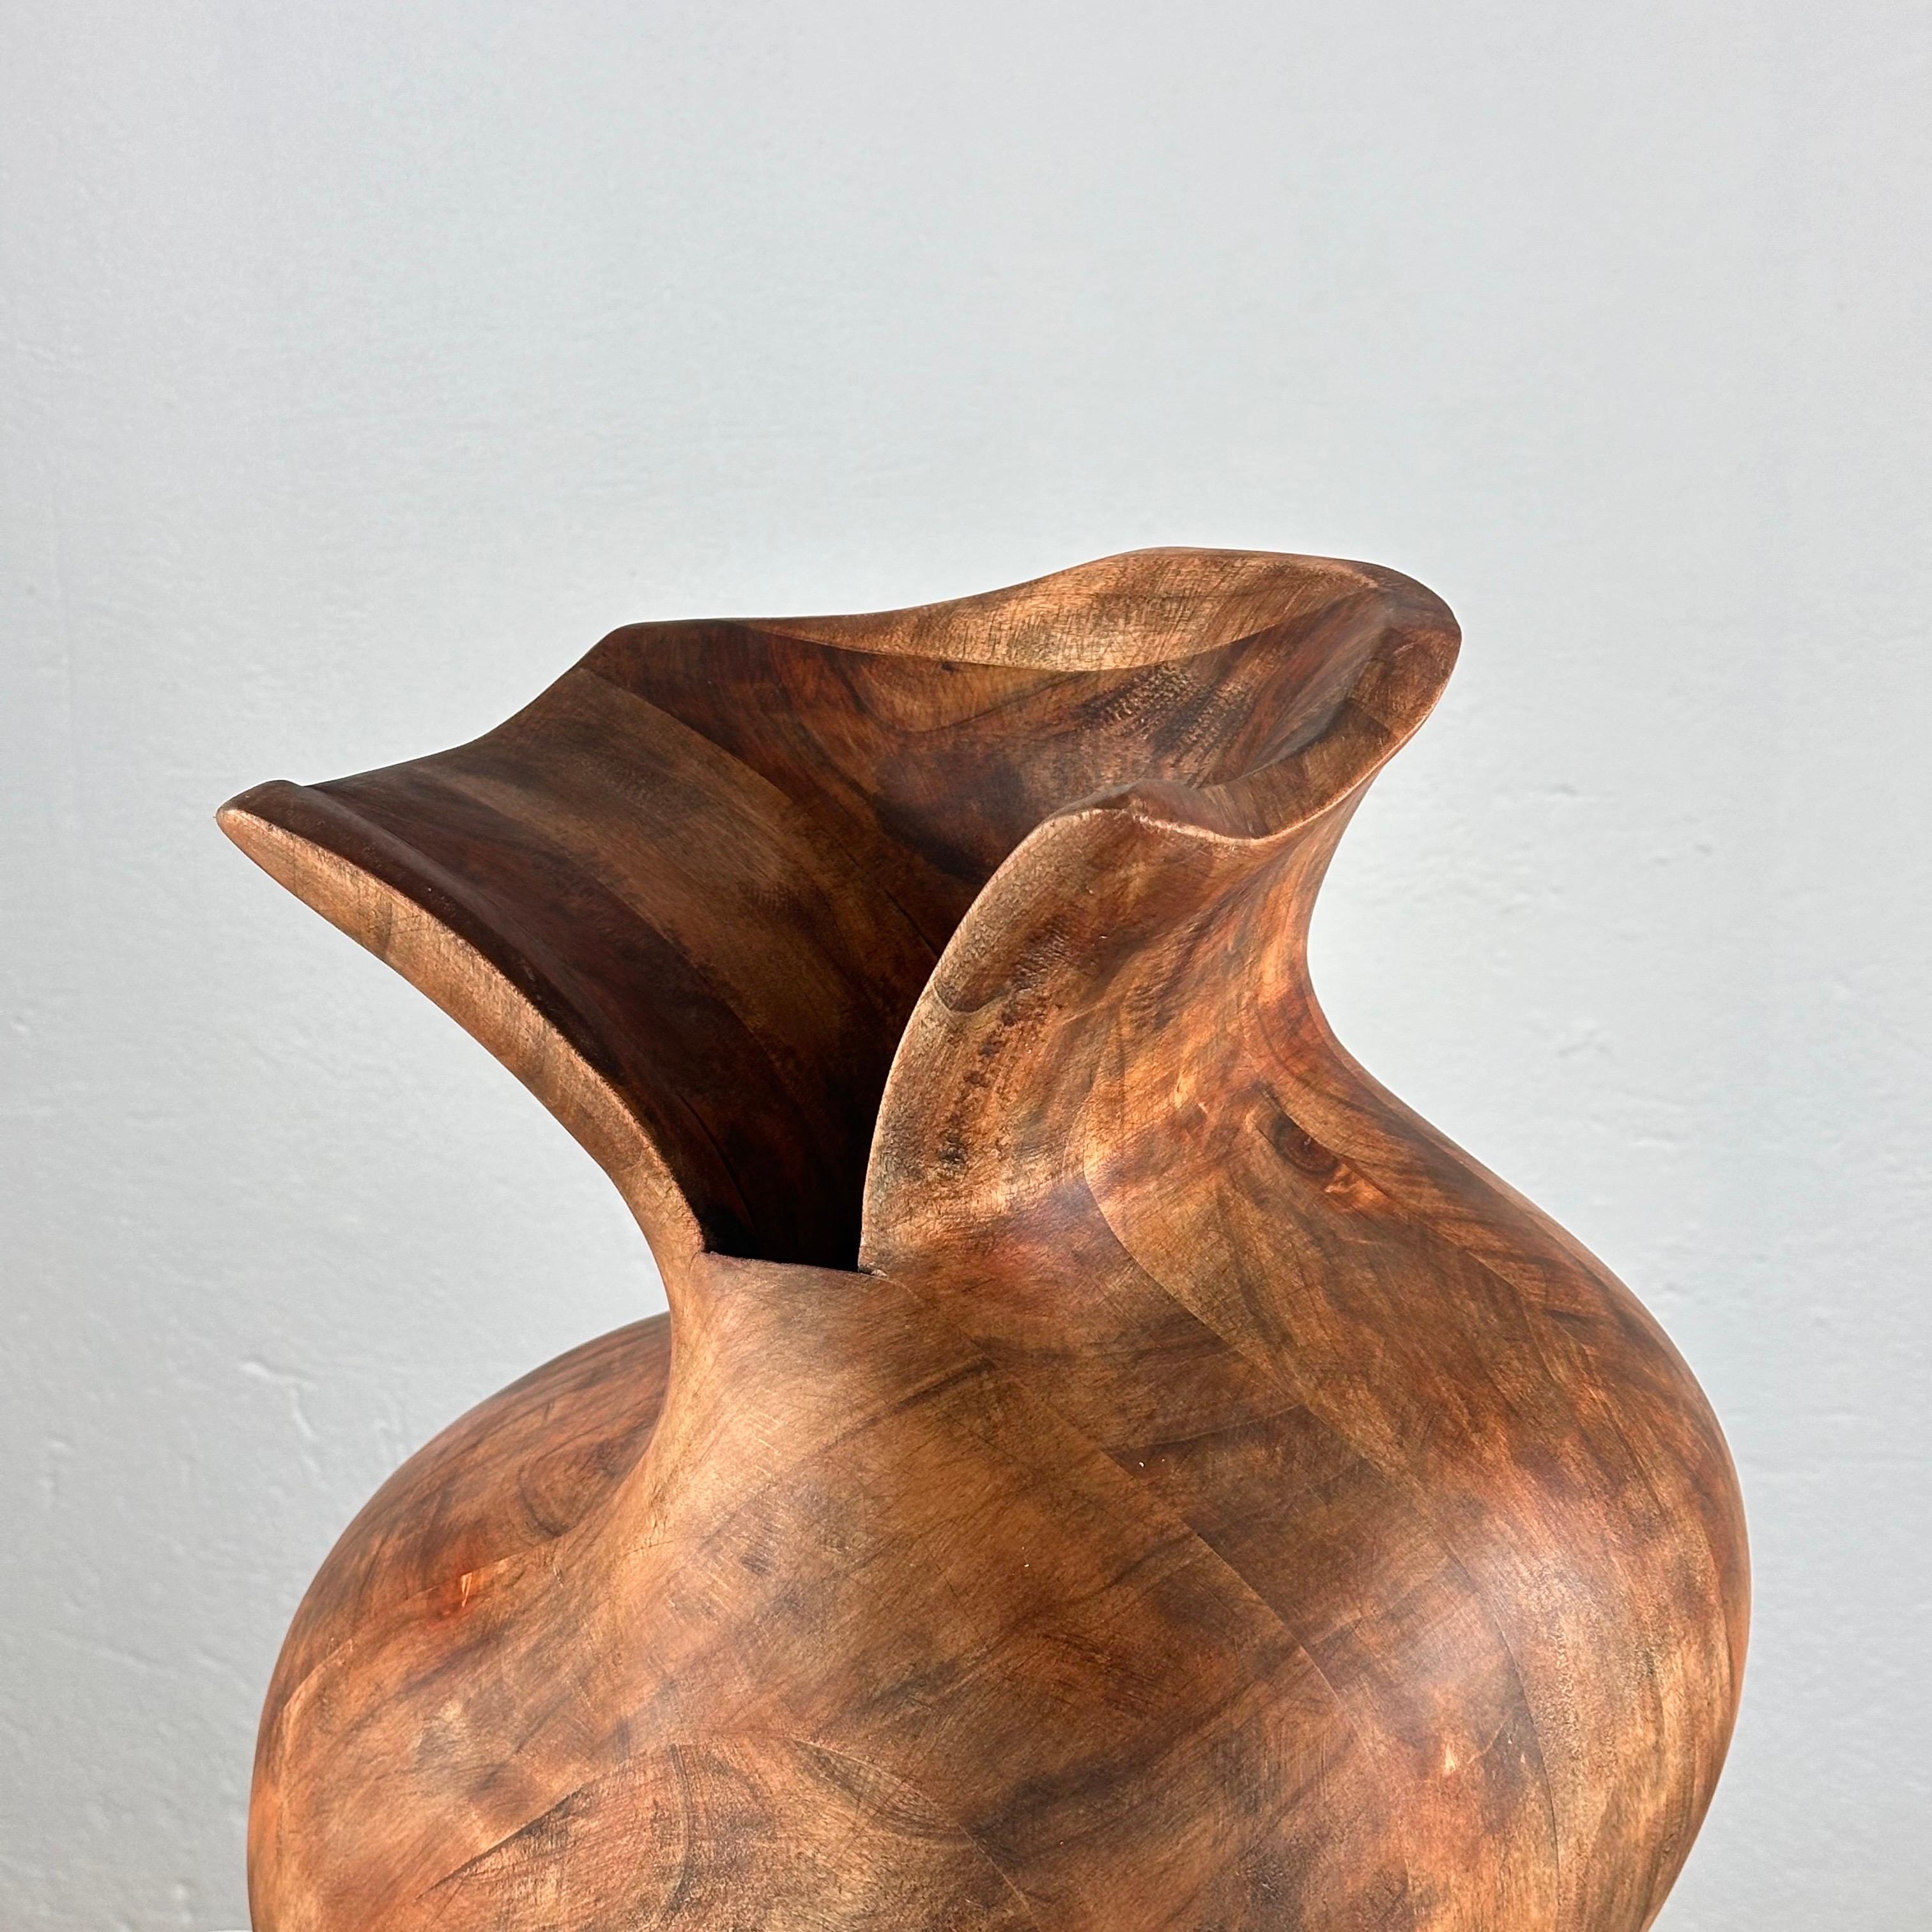 Phytomorphic Sculptural Wooden Vase, 1960, Italy For Sale 4